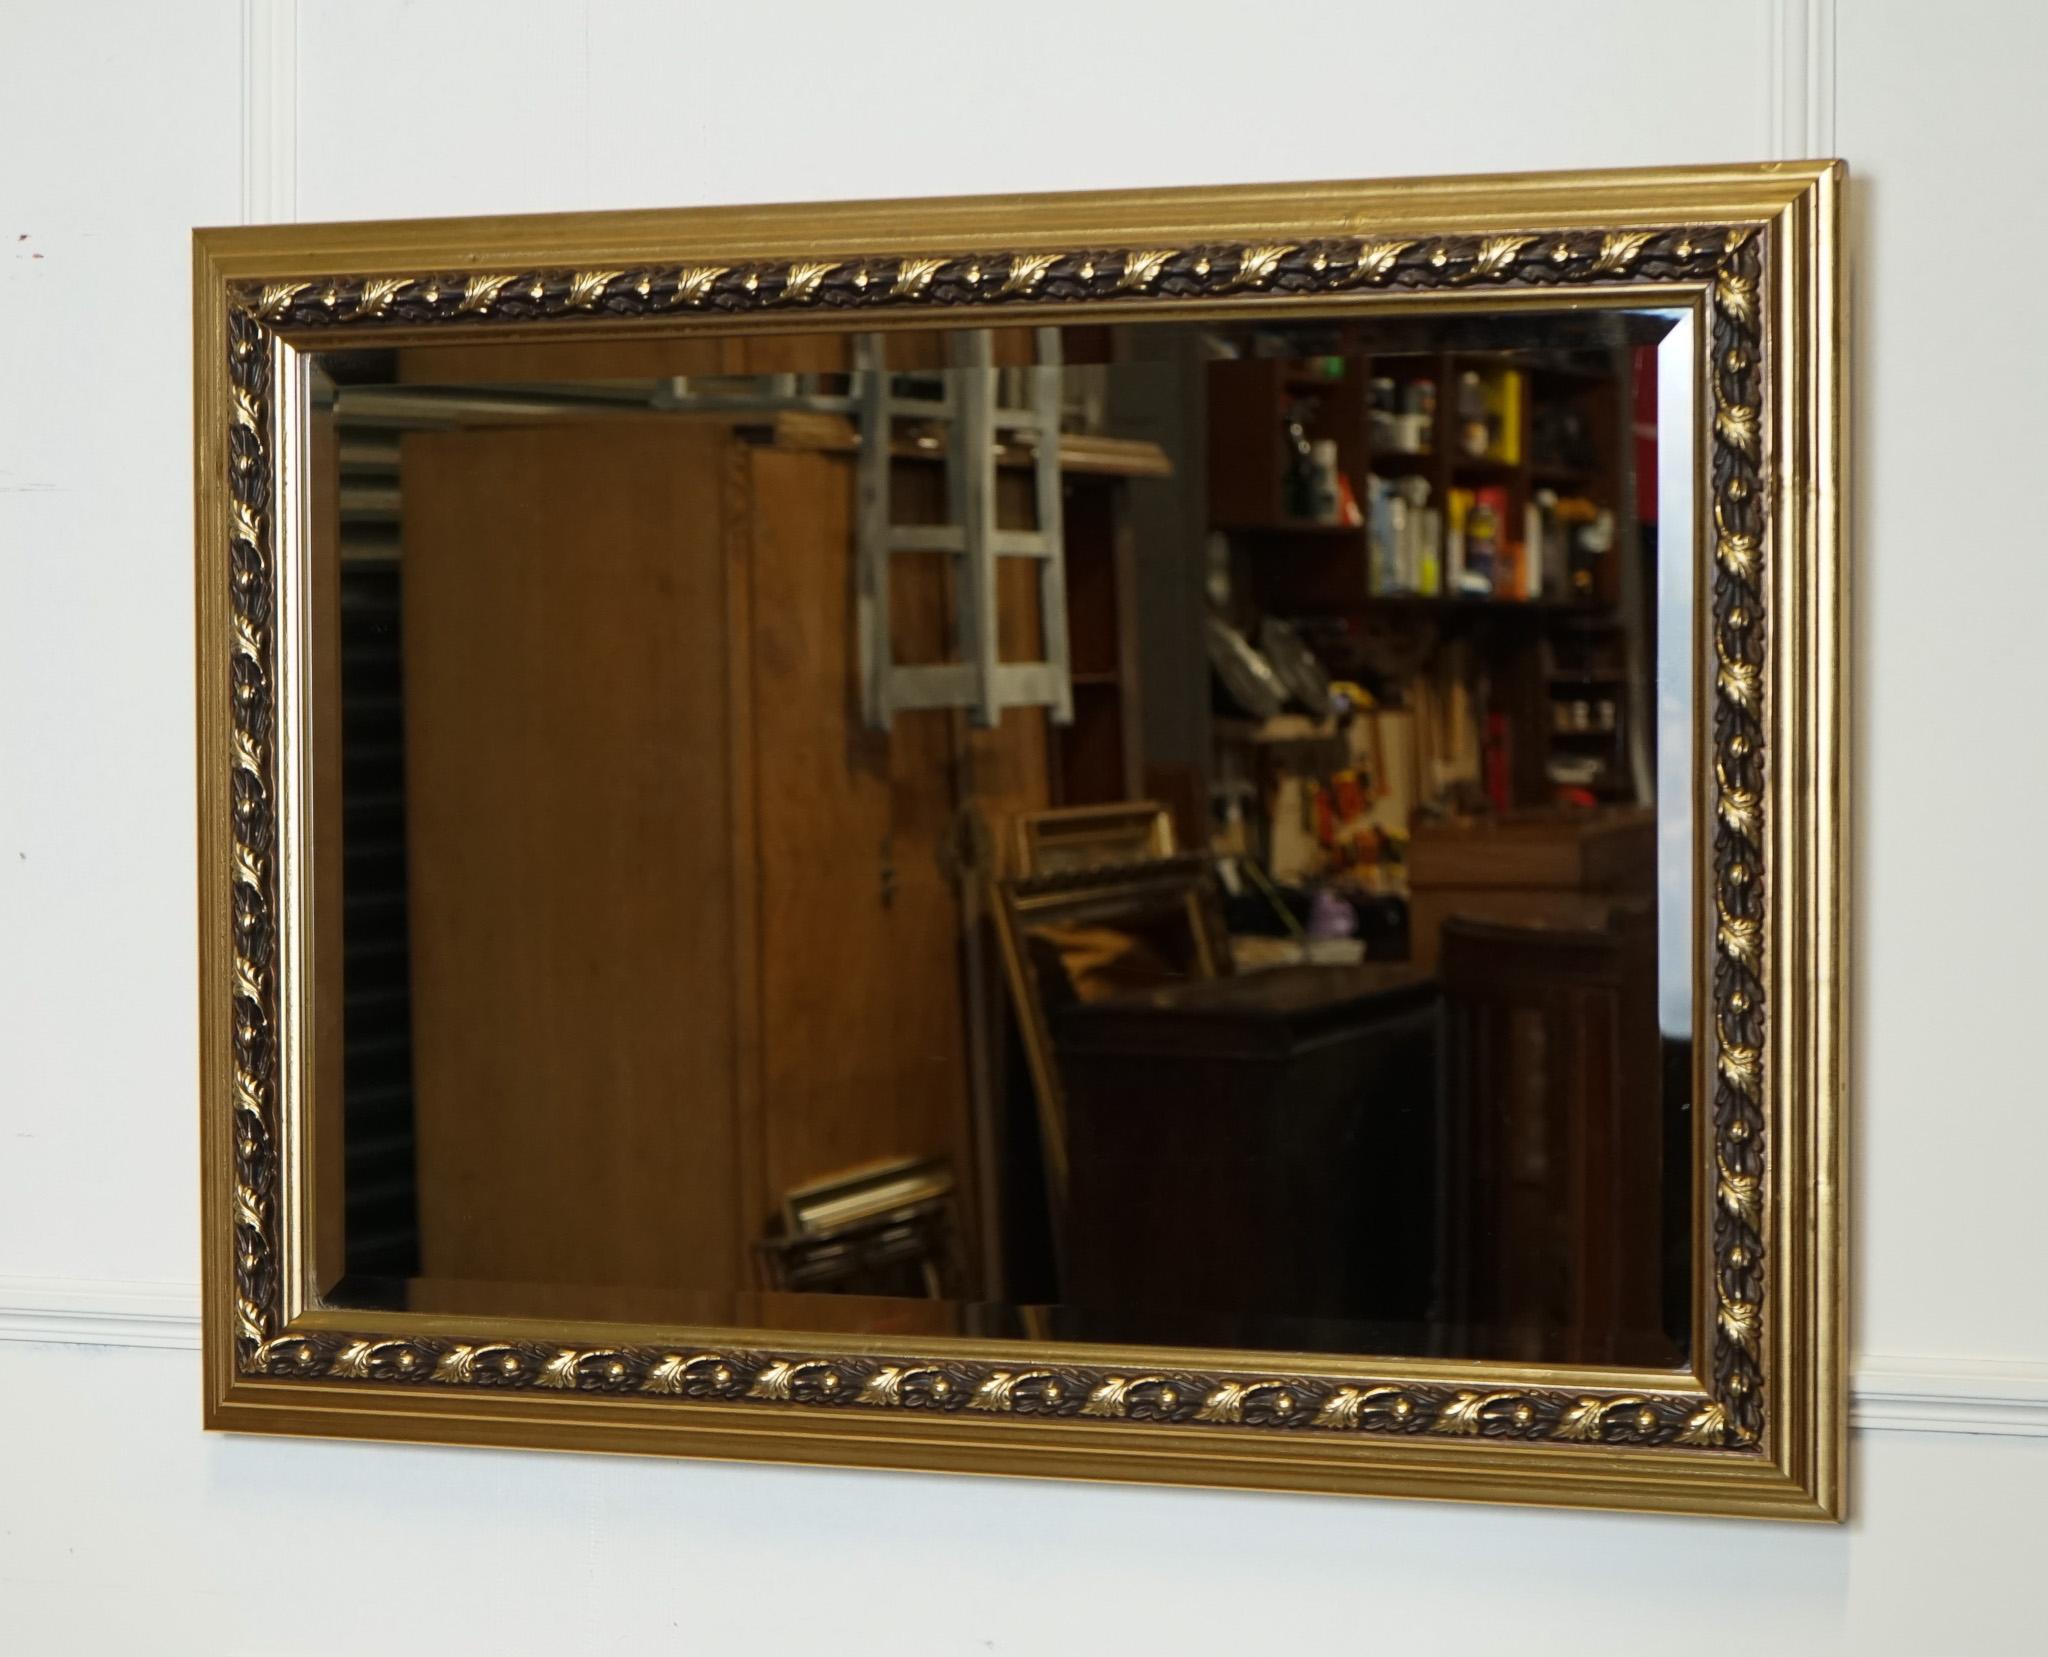 
We are delighted to offer for sale this Gold Ornate Rectangle Bevelled Mirror.

Please carefully examine the pictures to see the condition before purchasing, as they form part of the description. If you have any questions, please message us.